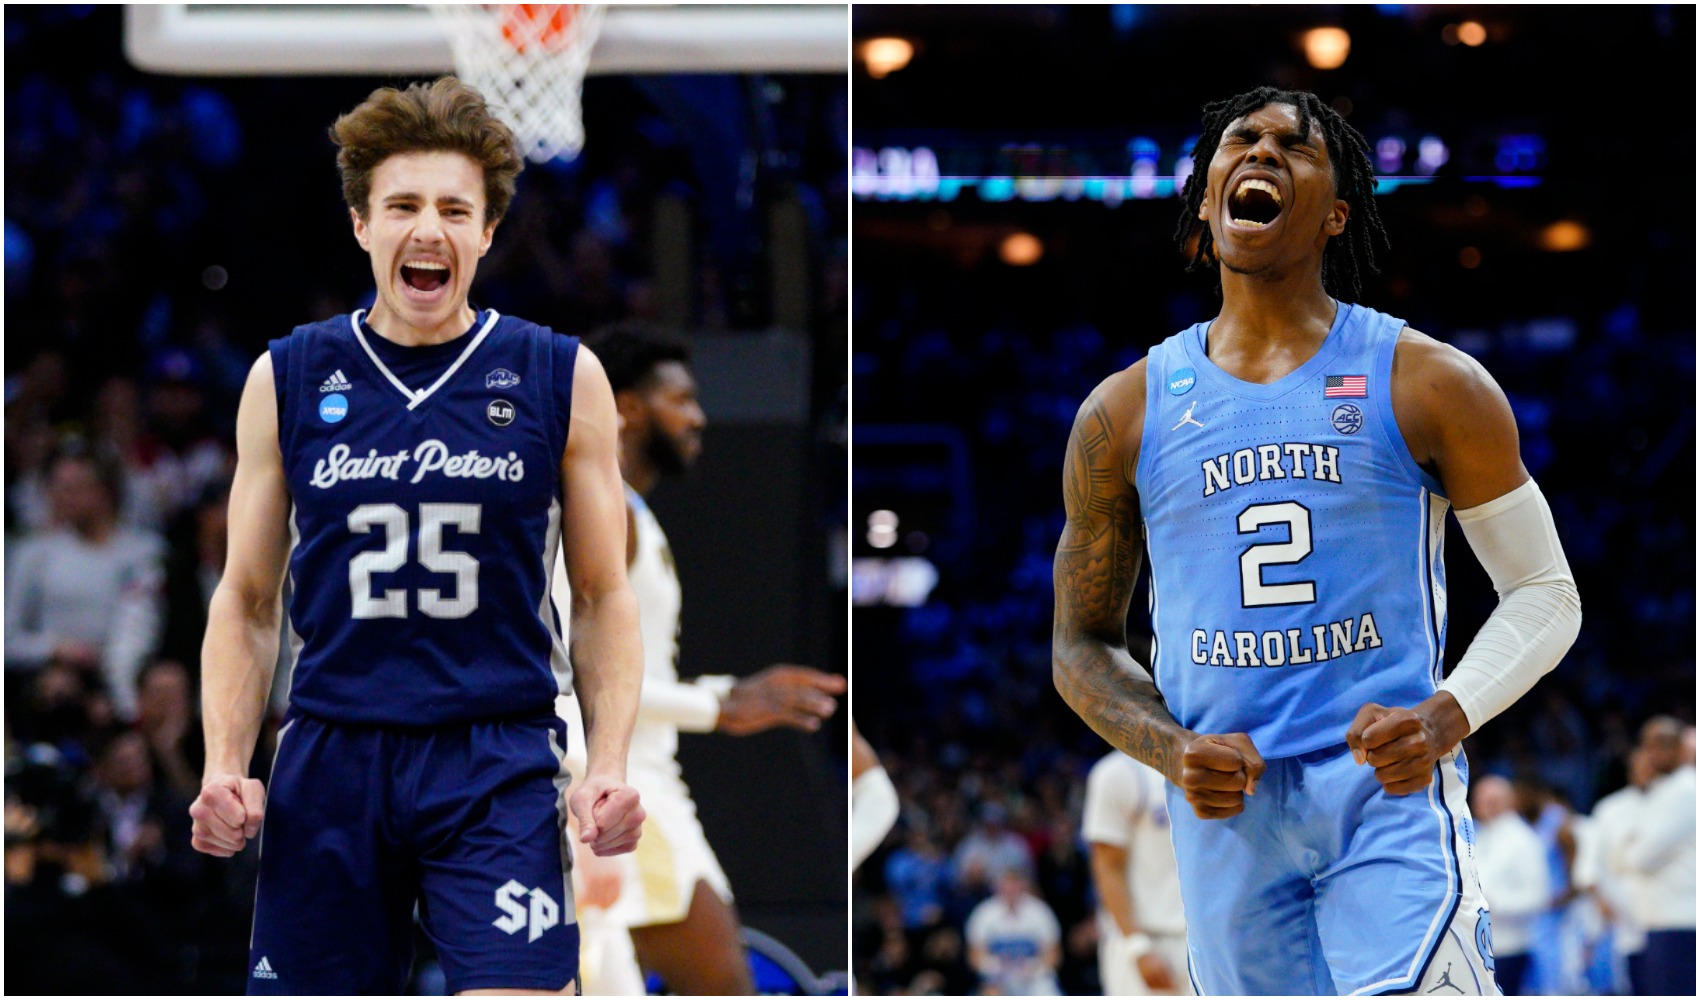 UNC Basketball vs. NC State: How To Watch, Cord-Cutting Options